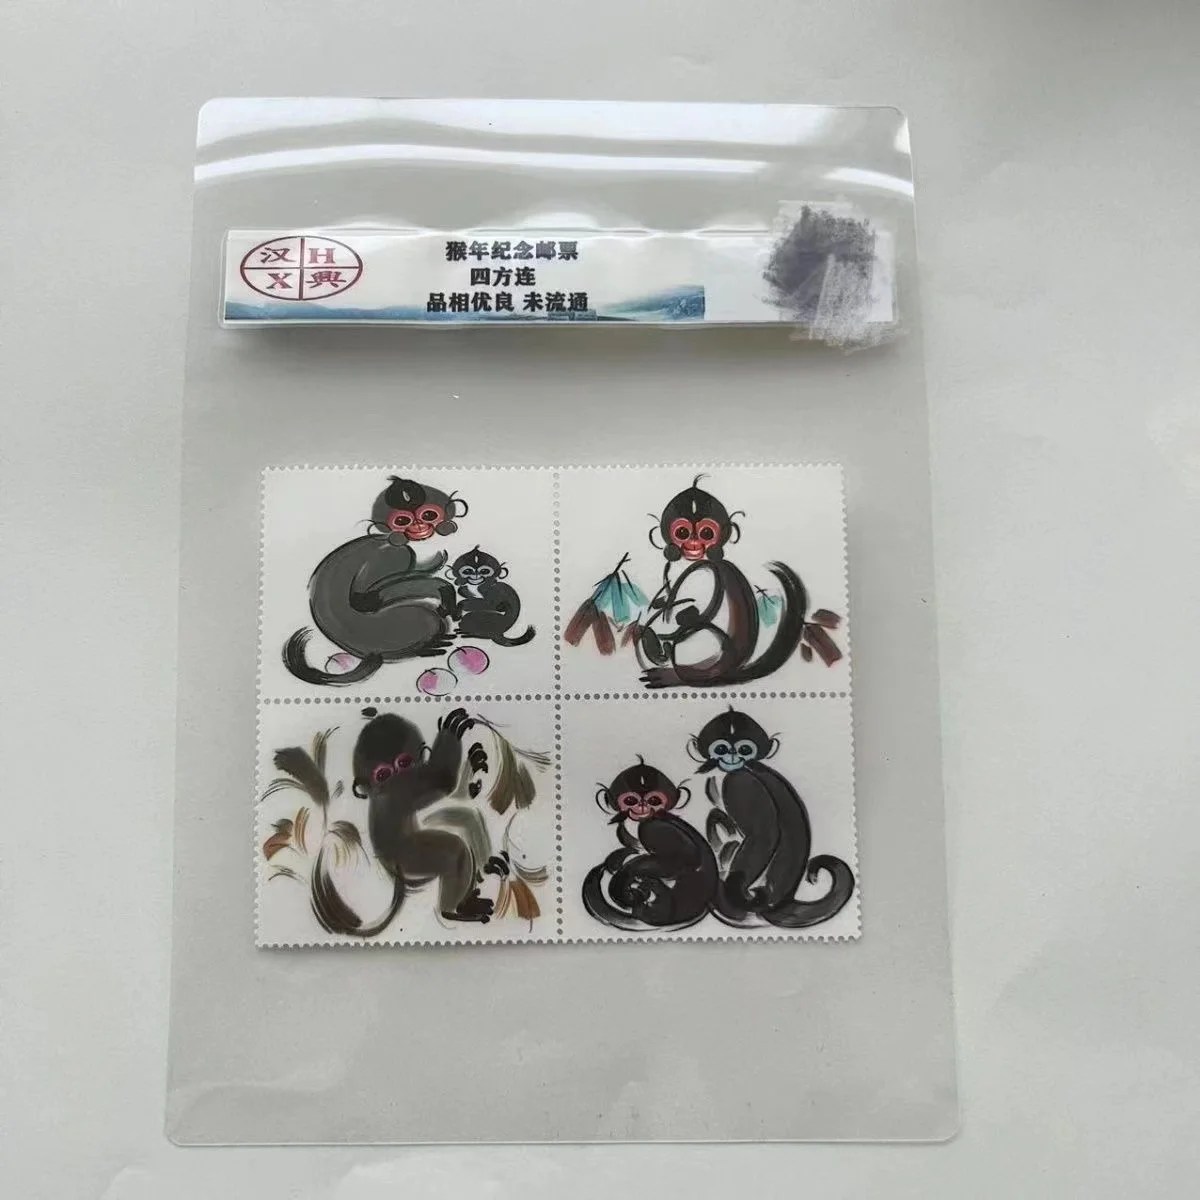 

Old Ancient Cute Monkey Stamp Year of the Monkey Mascot Postage Stamps for Collection 4 Jointed Ticket Set HANXING Rating Level